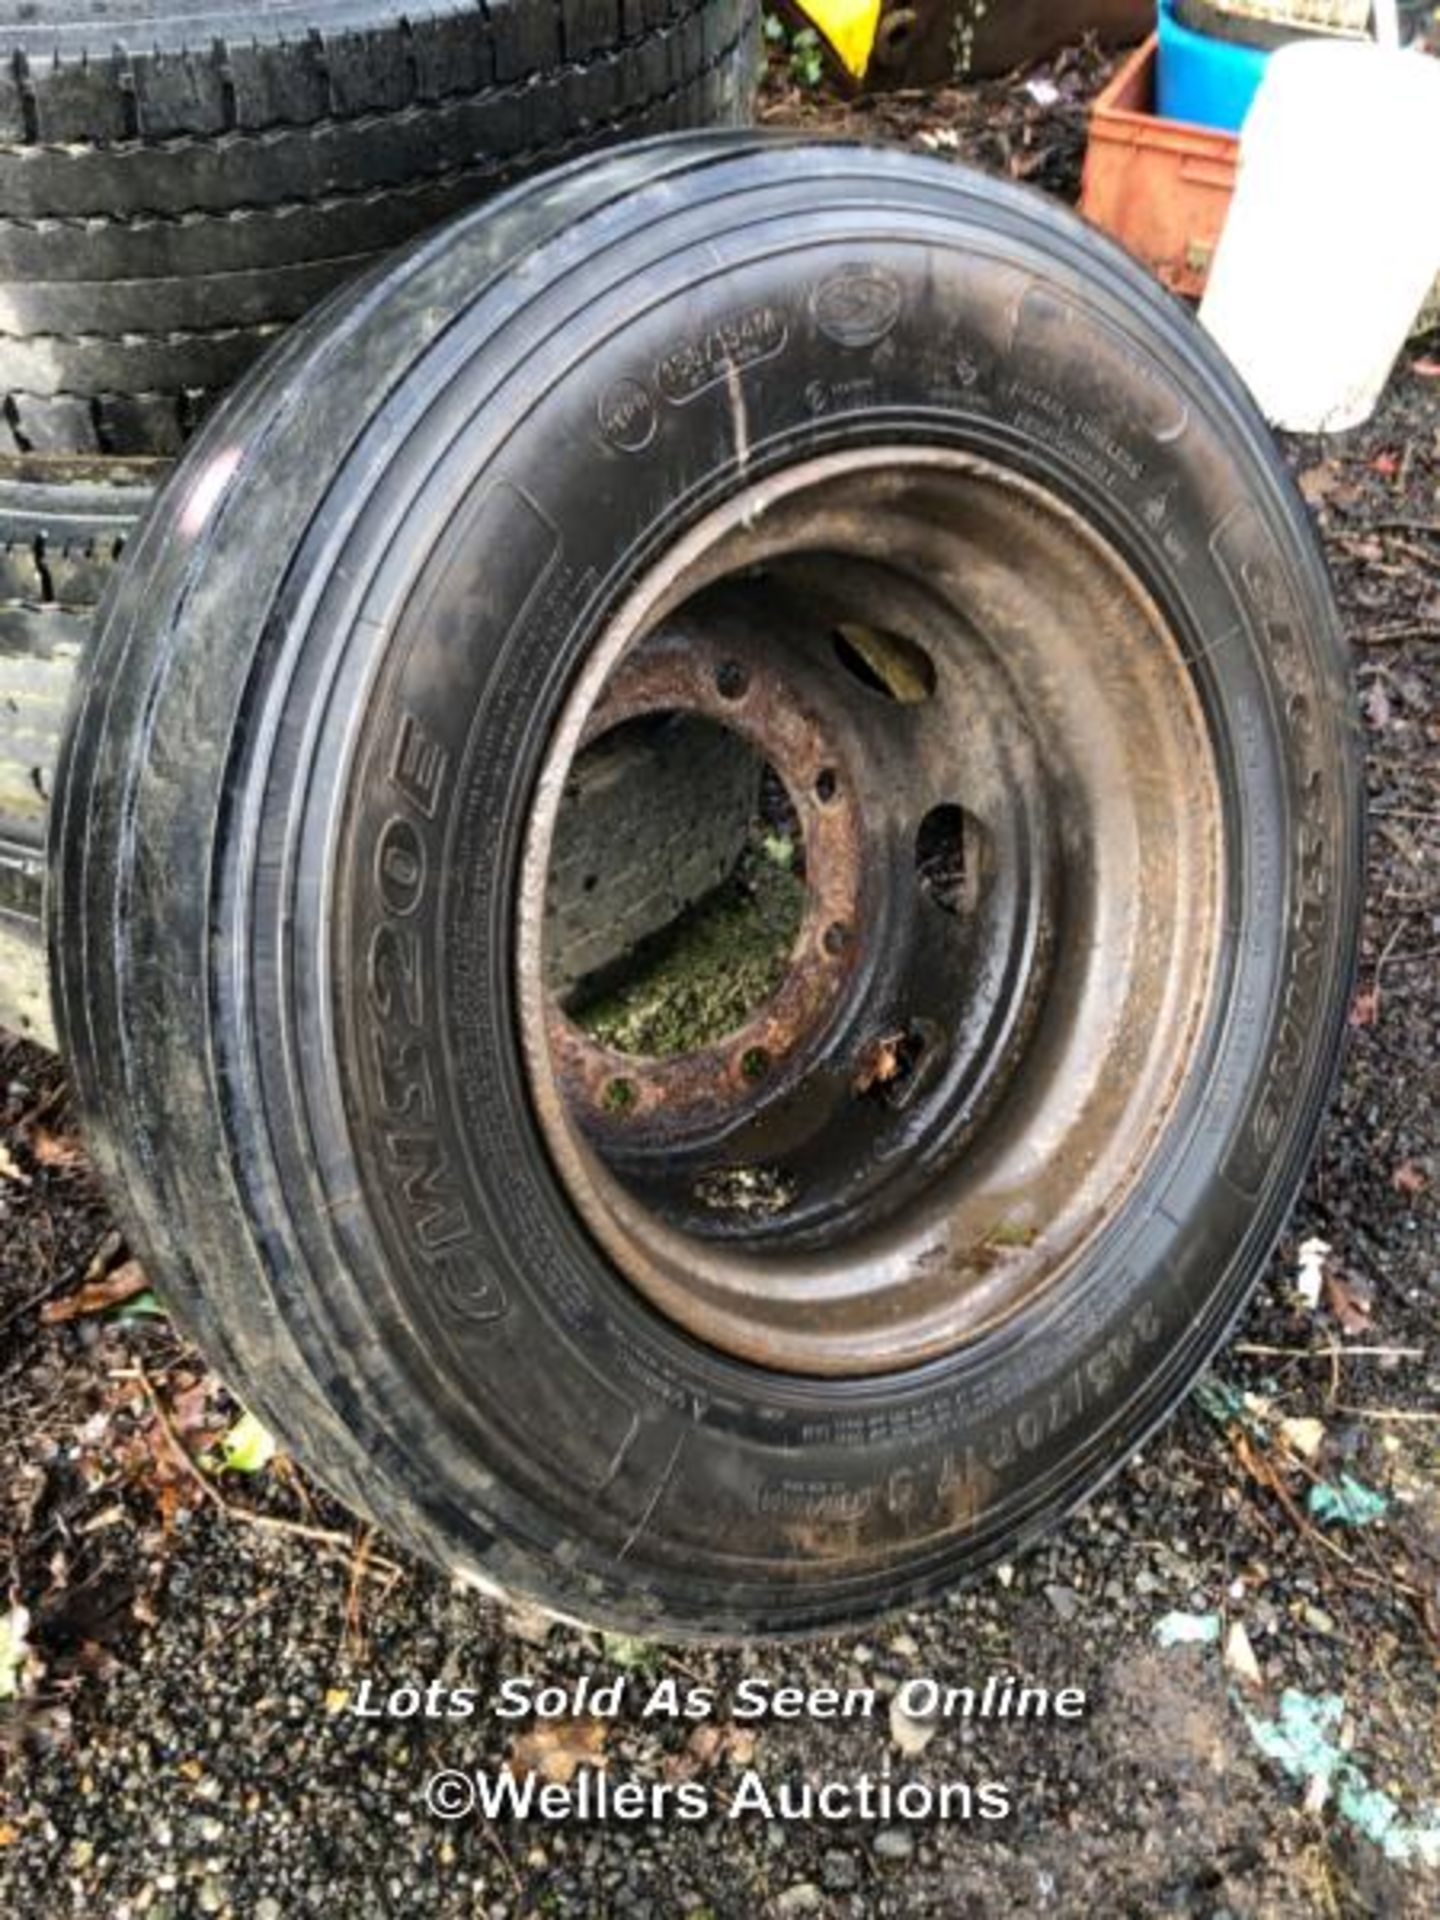 6X WHEELS AND TYRES 24570X17.5 AND 3X TYRES / NO VAT ON HAMMER PRICE - Image 3 of 5